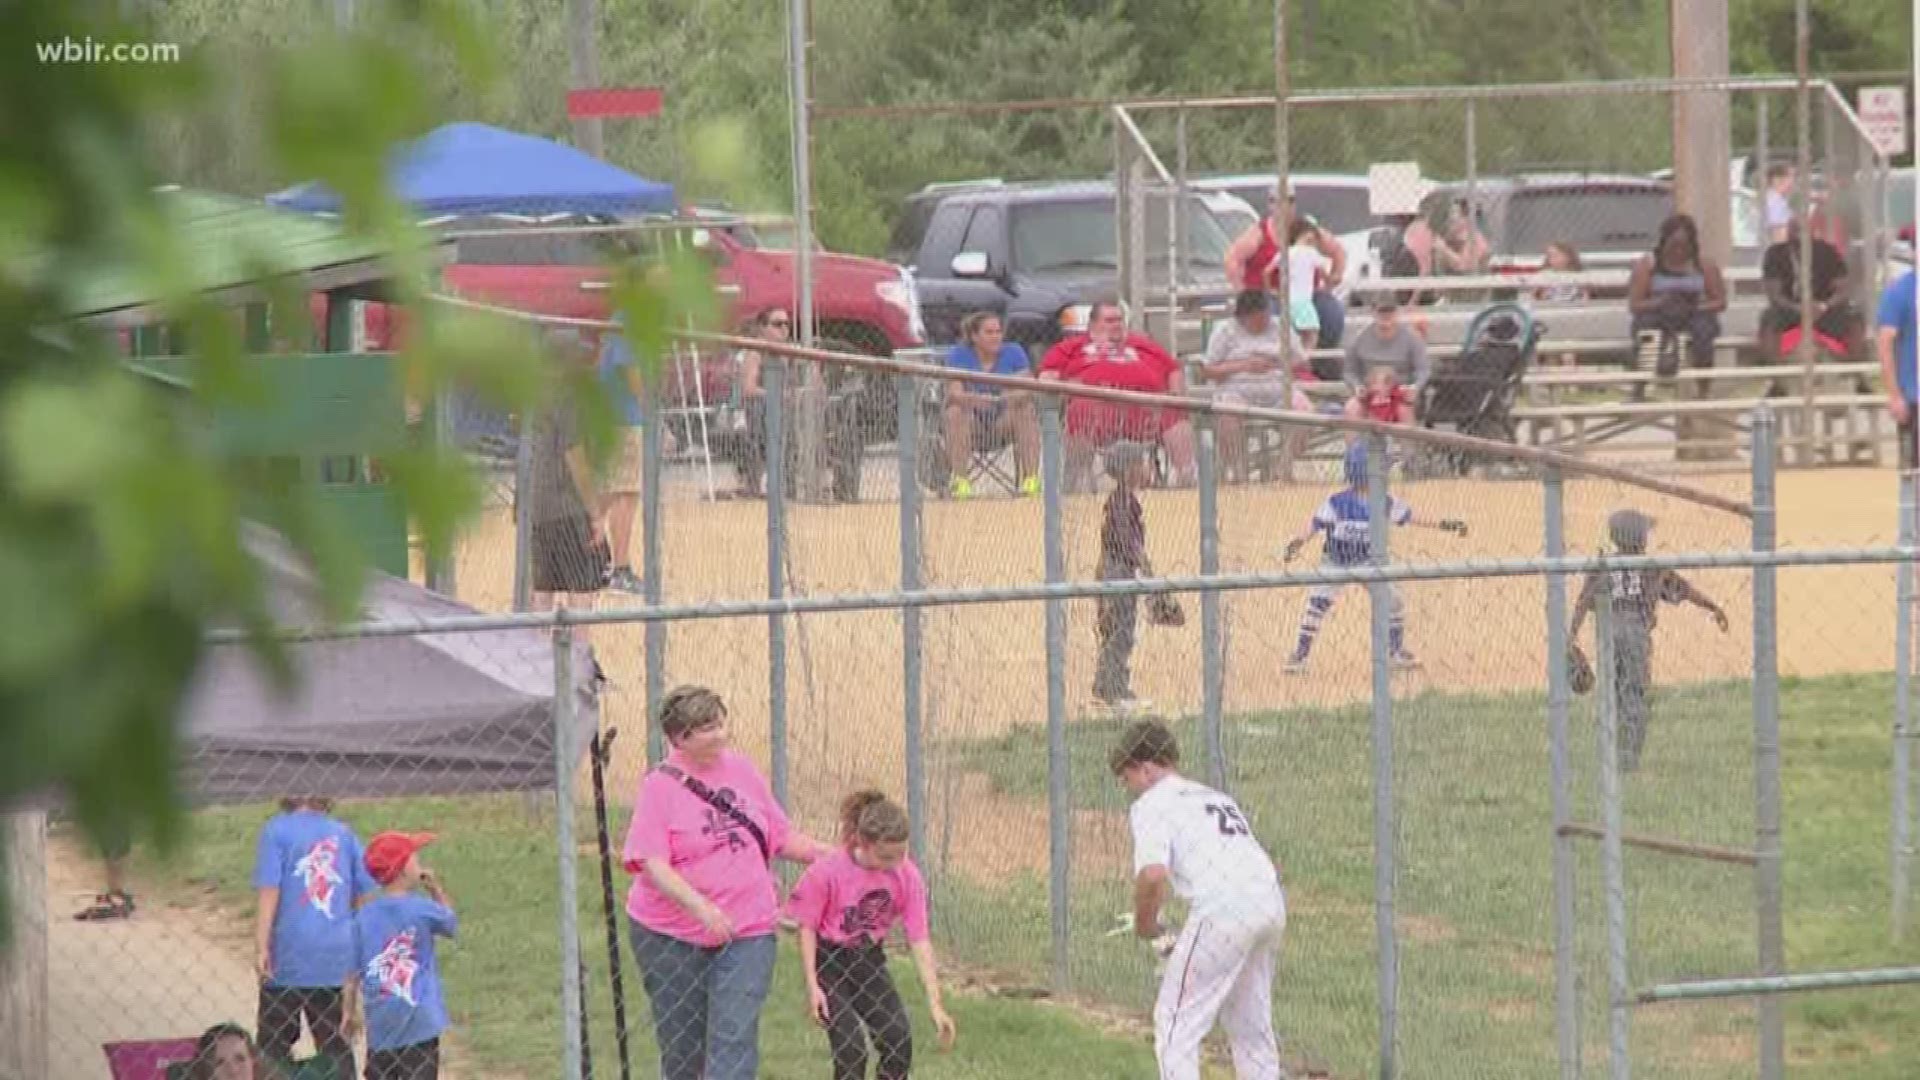 Bower Field in South Knox County was packed this weekend for the Bring the Thunder Tournament, raising money for a young boy with leukemia.